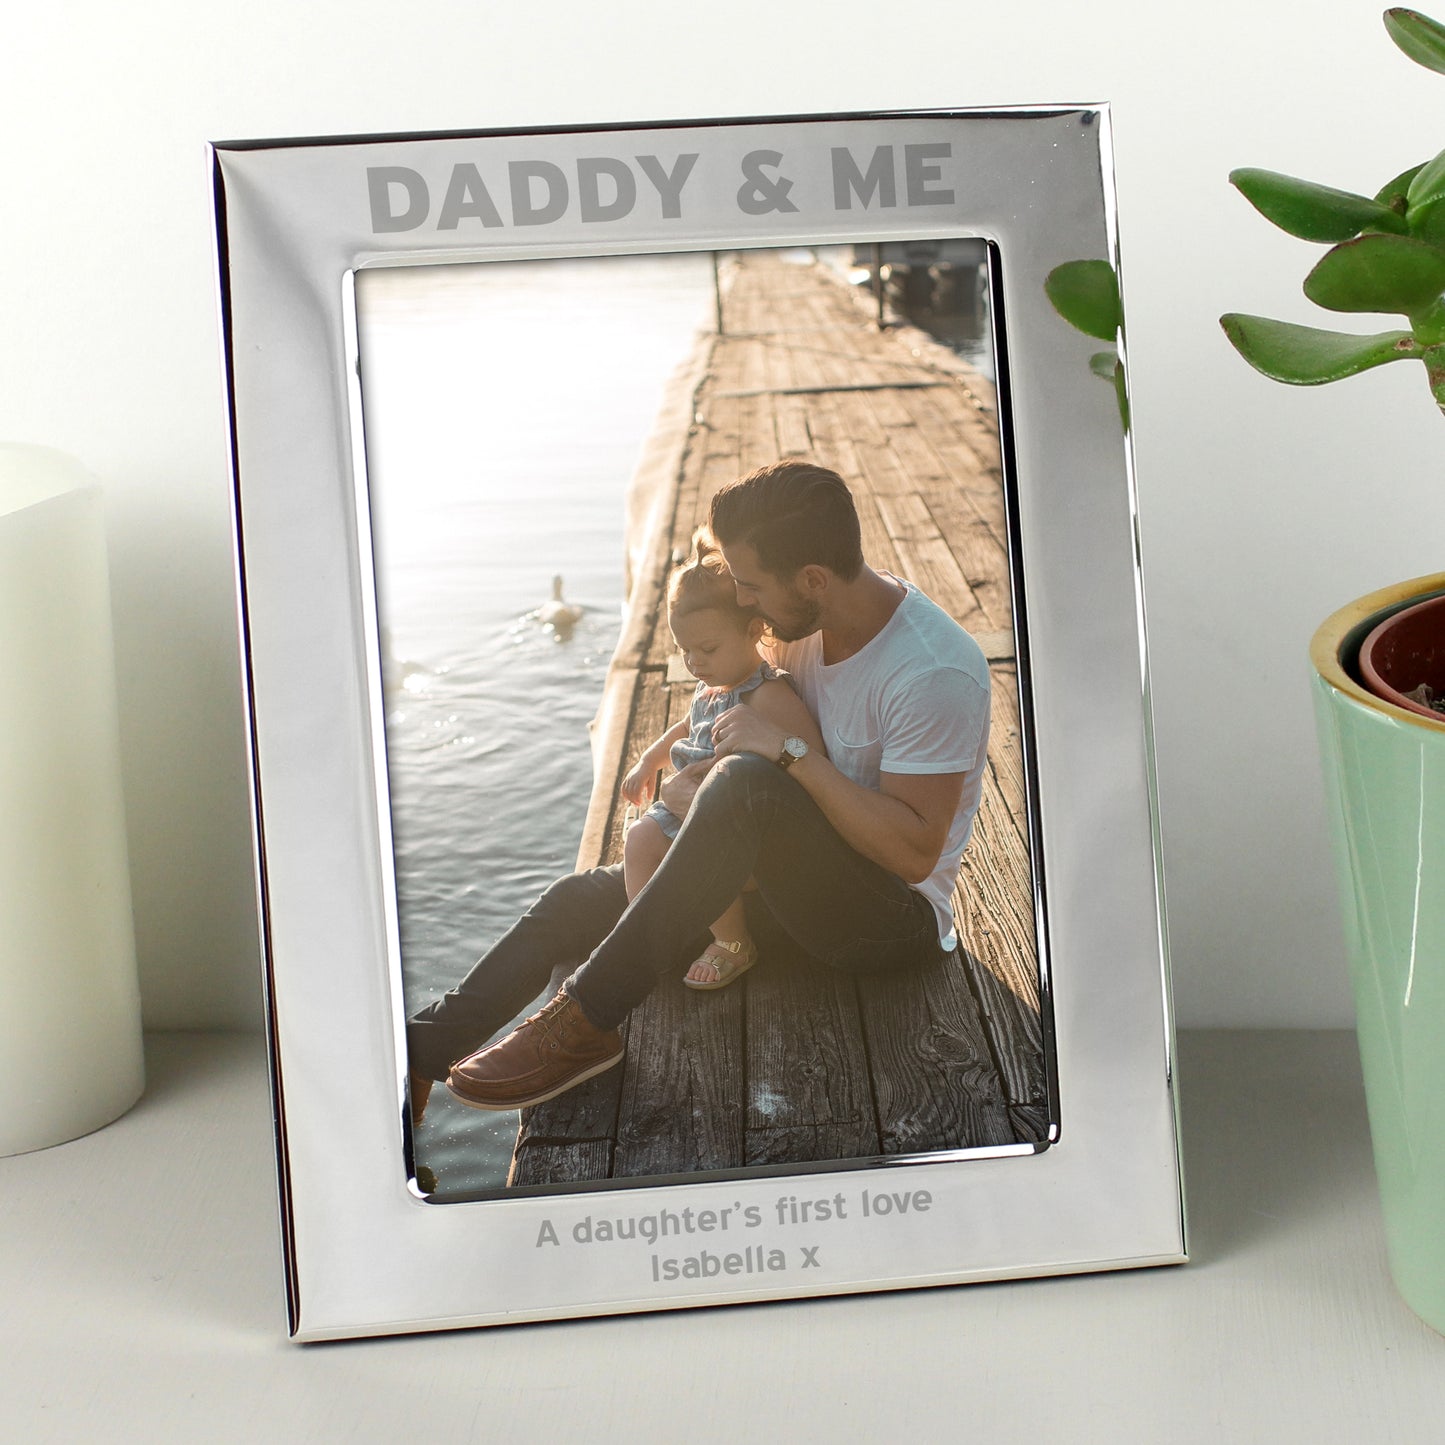 Personalised Silver 5x7 Daddy & Me Photo Frame - Personalise It!